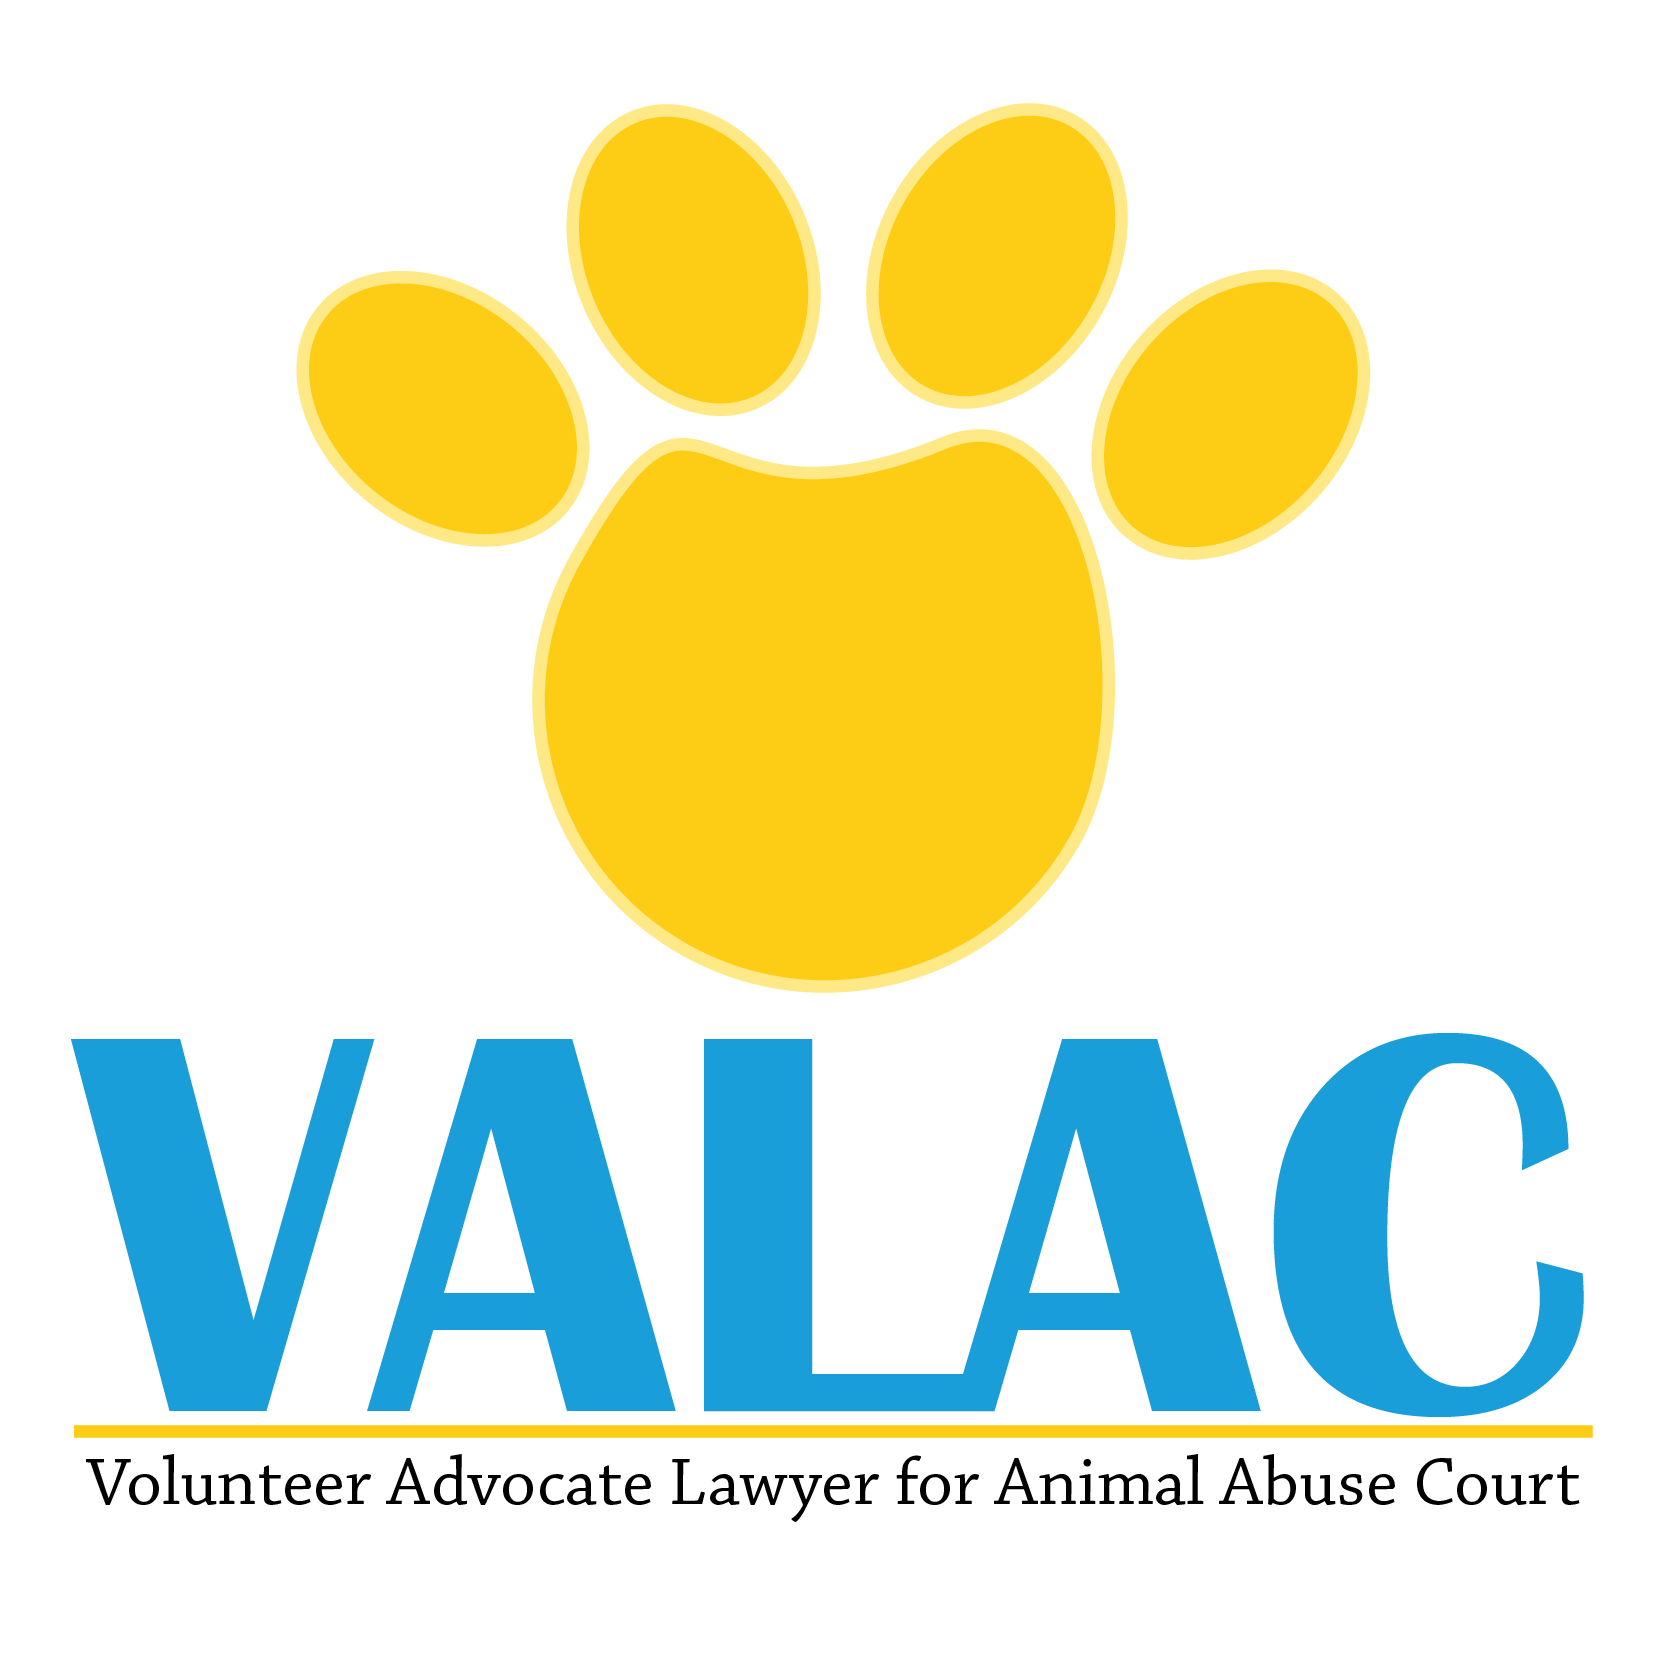 Yellow Circle Animal Logo - Volunteer Advocate Lawyer for Animal Abuse Court County